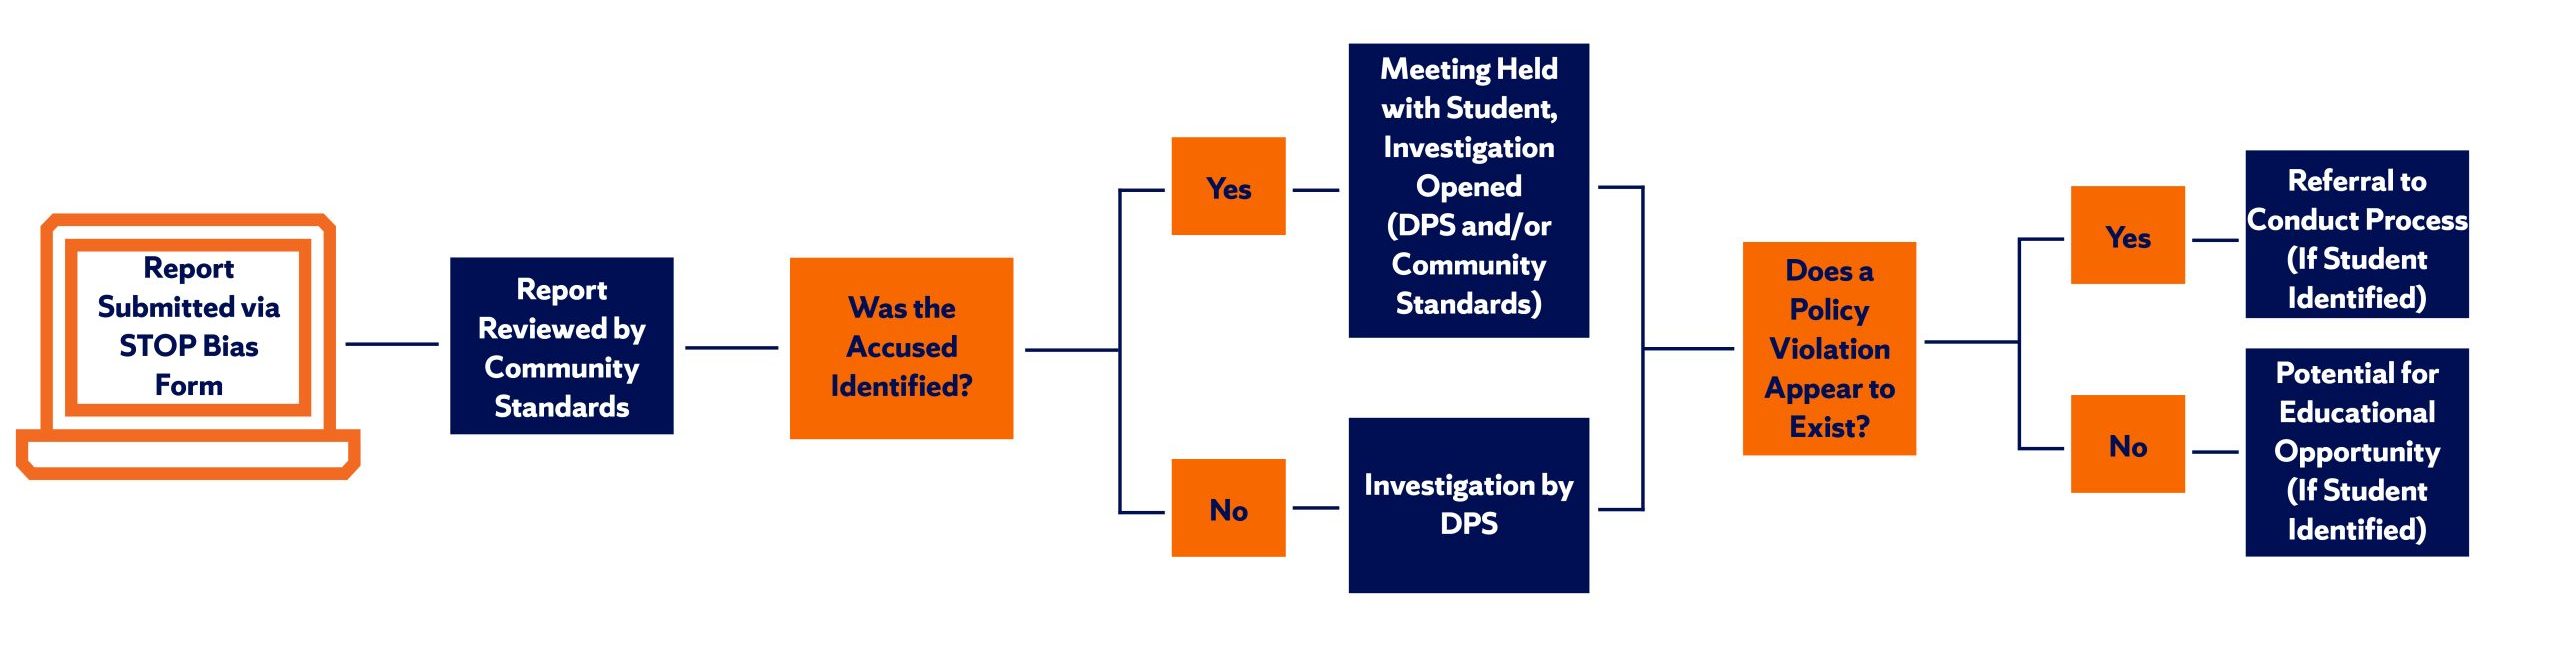 Flow chart showing how reports are investigated